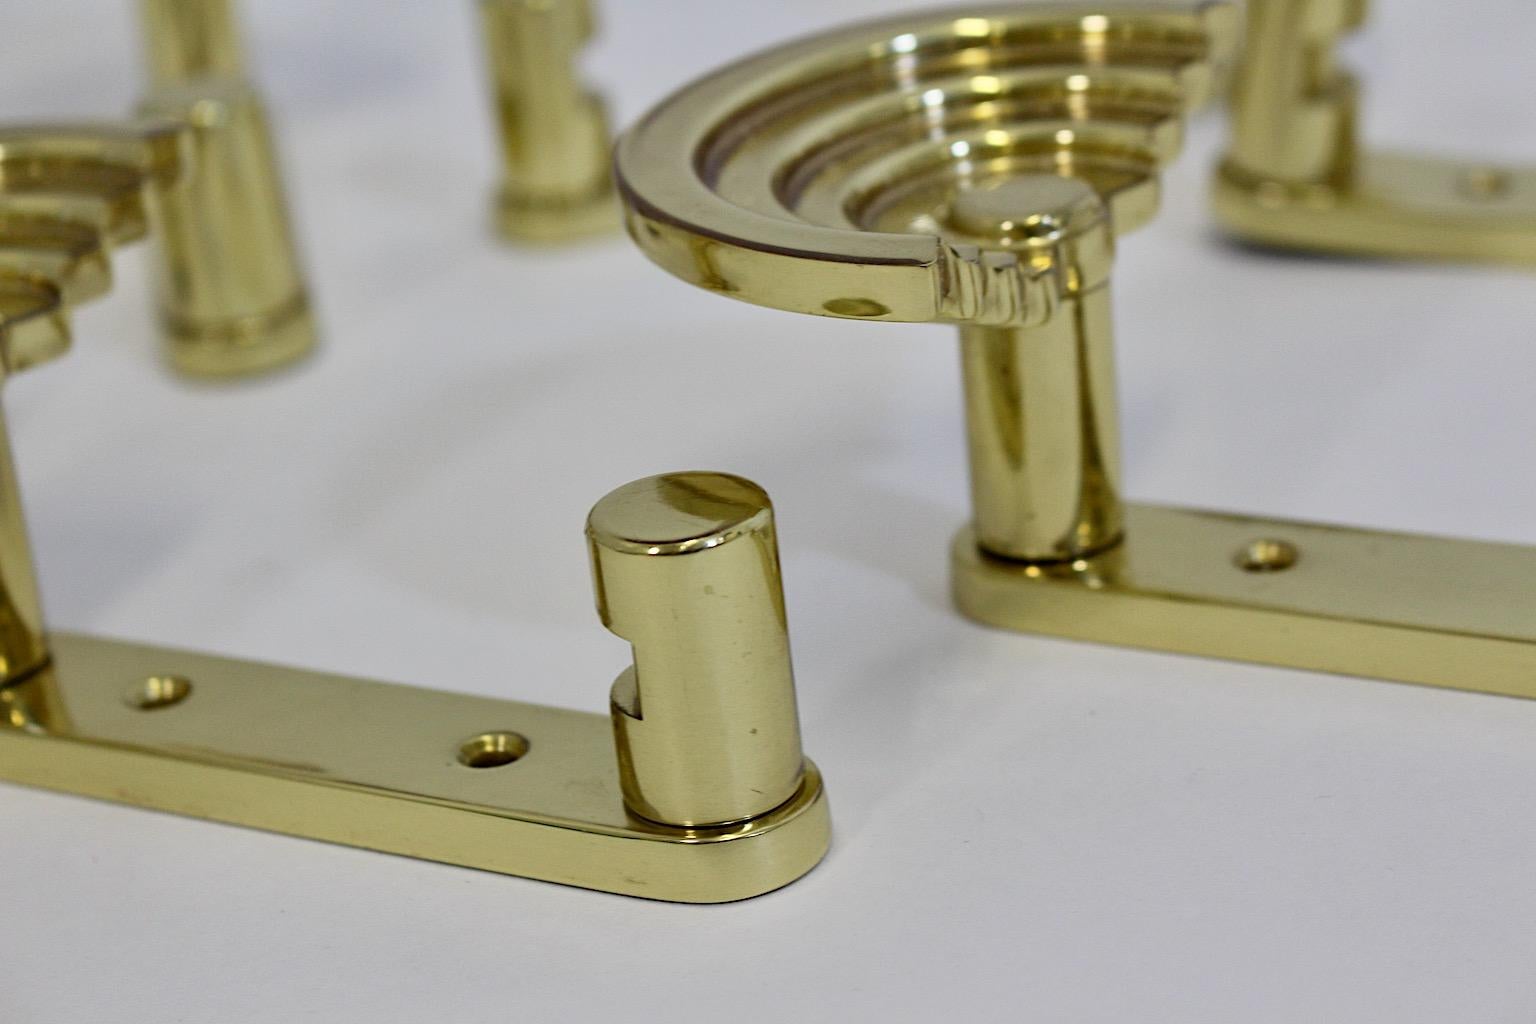 Late 20th Century Postmodern Vintage Brass Six Wall Hooks SE 314 C Ettore Sottsass 1985 Italy For Sale